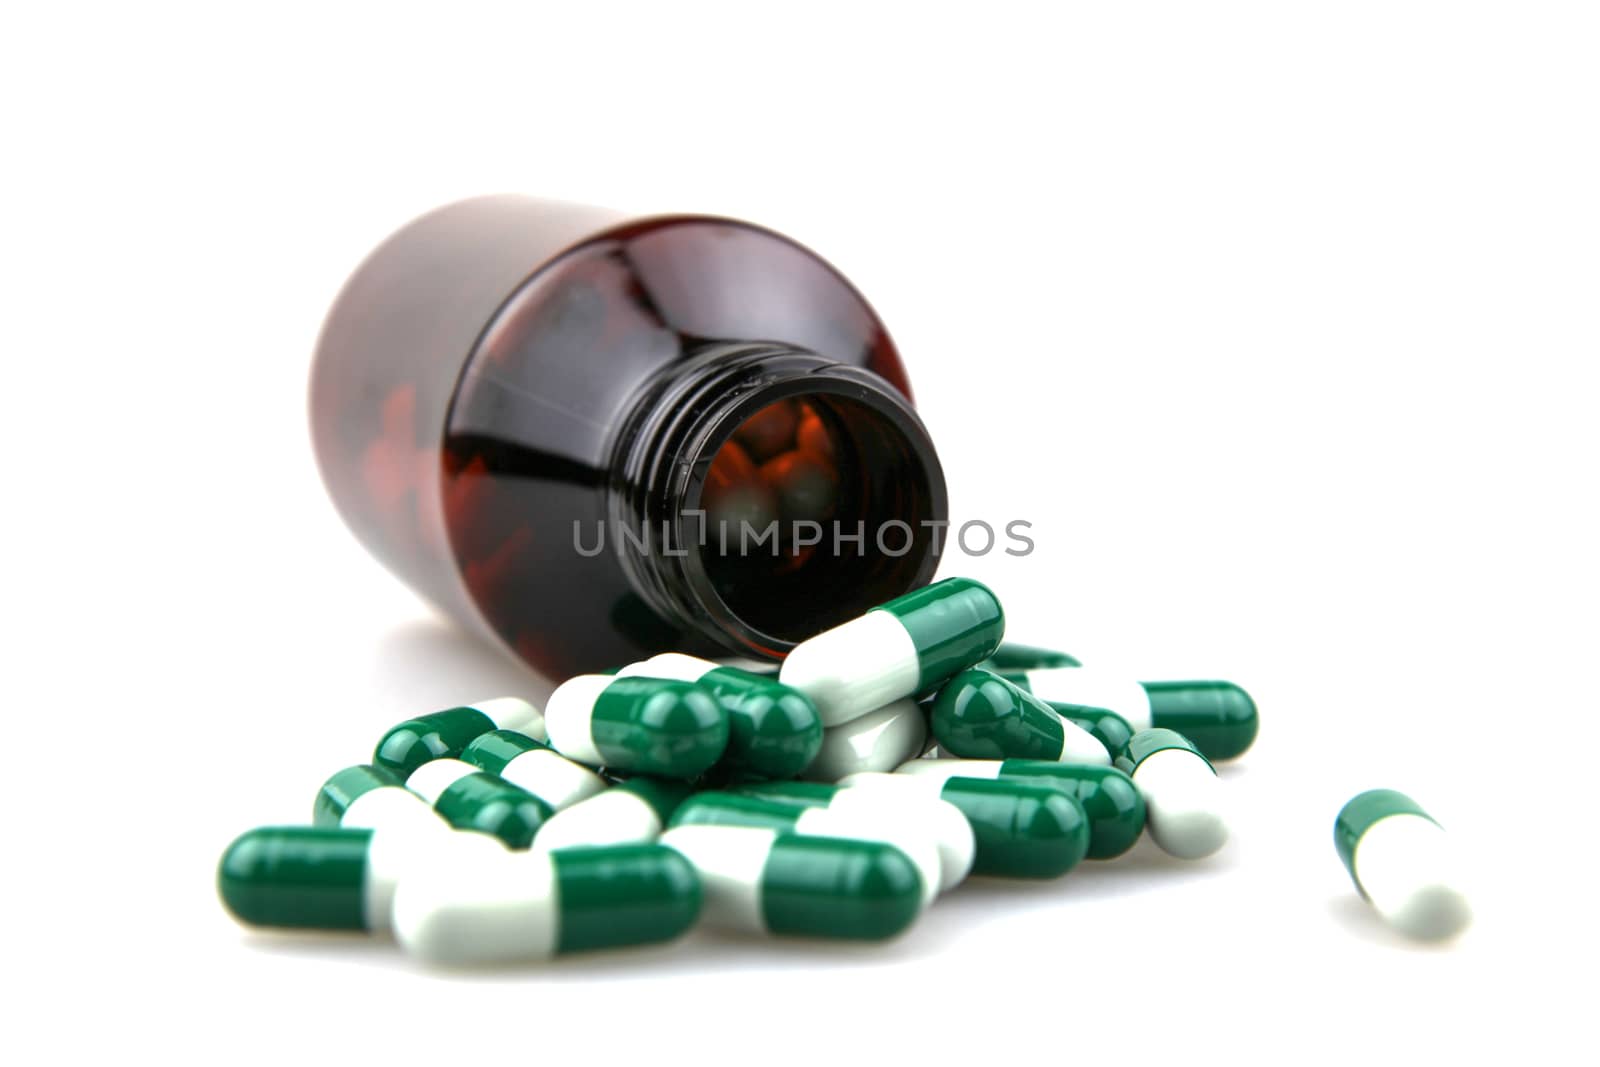 Pill bottle with medications over white background by nenovbrothers